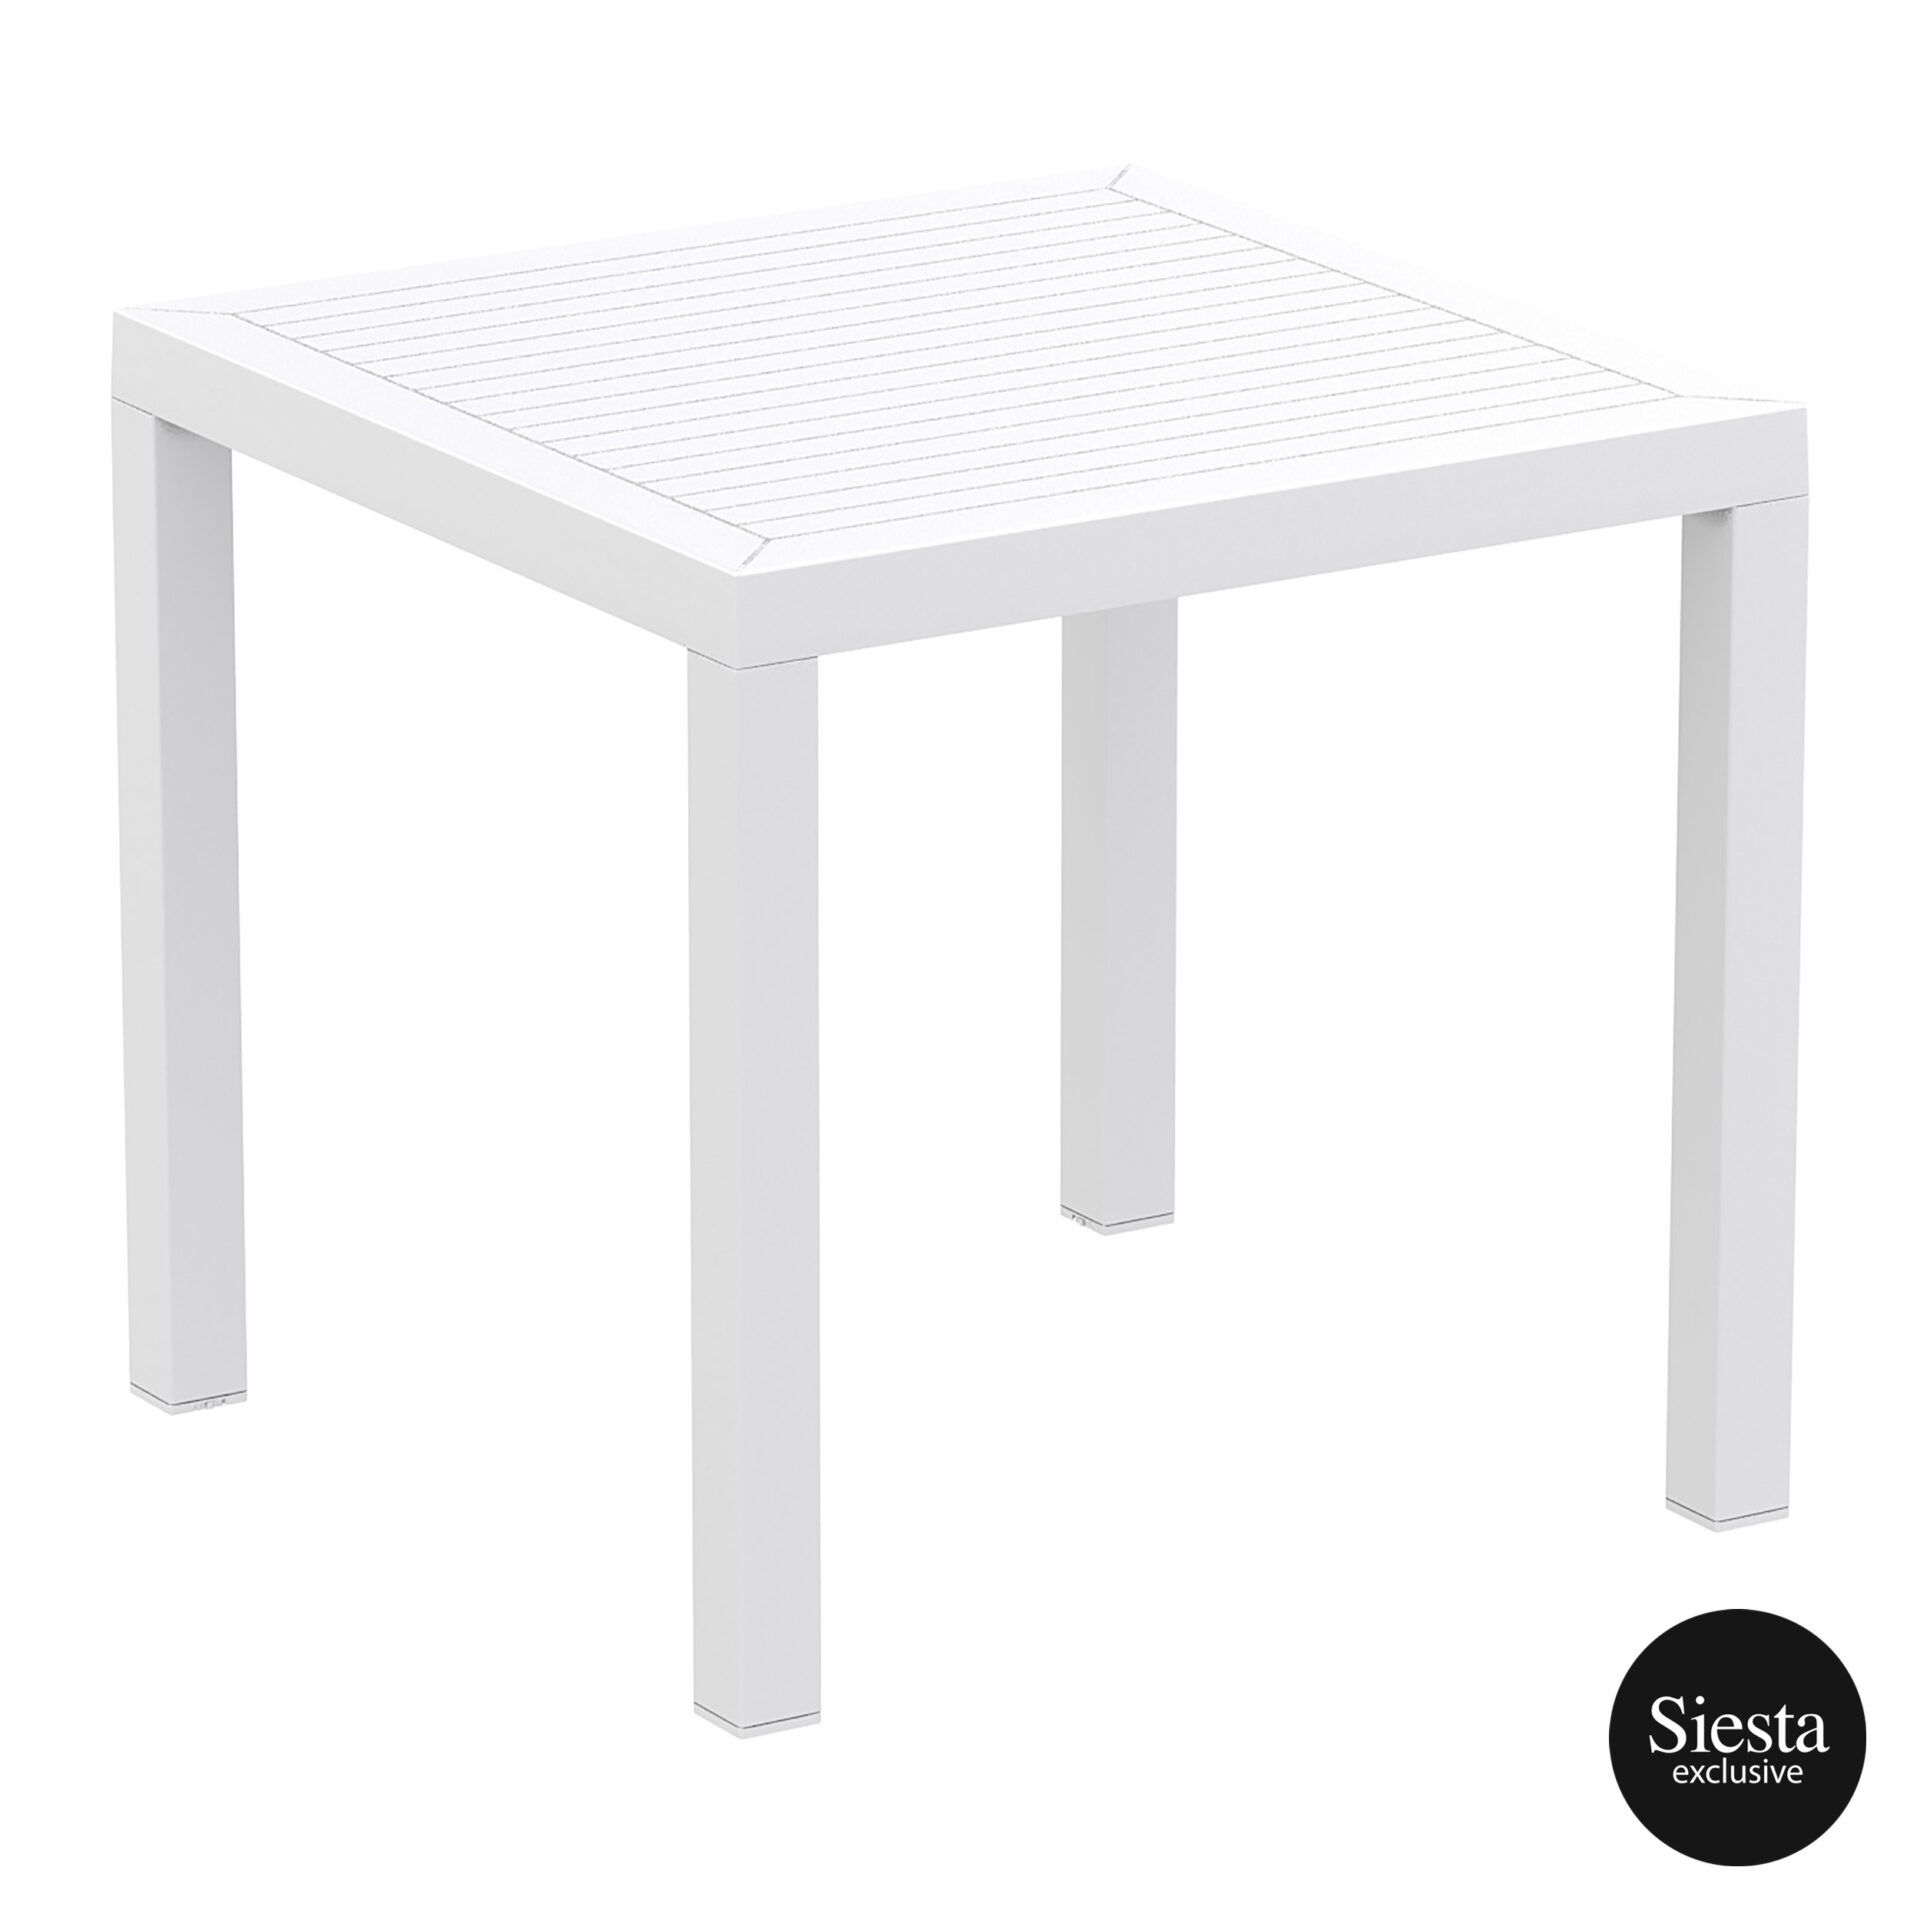 Ares 80 Table - White